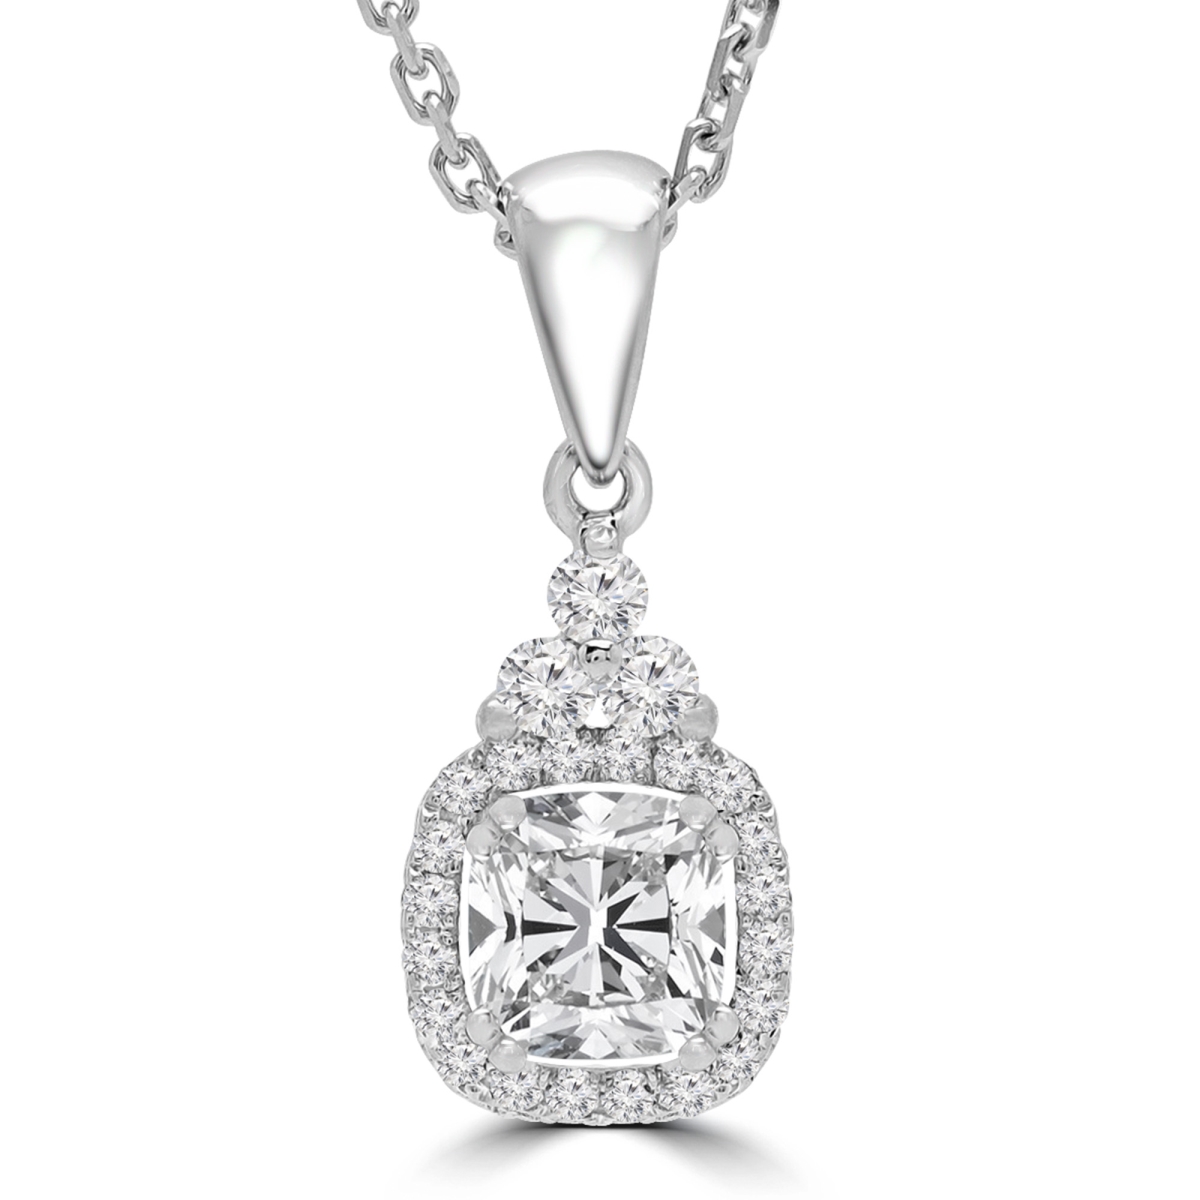 Md190523 0.67 Ctw Cushion Diamond Halo Pendant Necklace In 18k White Gold